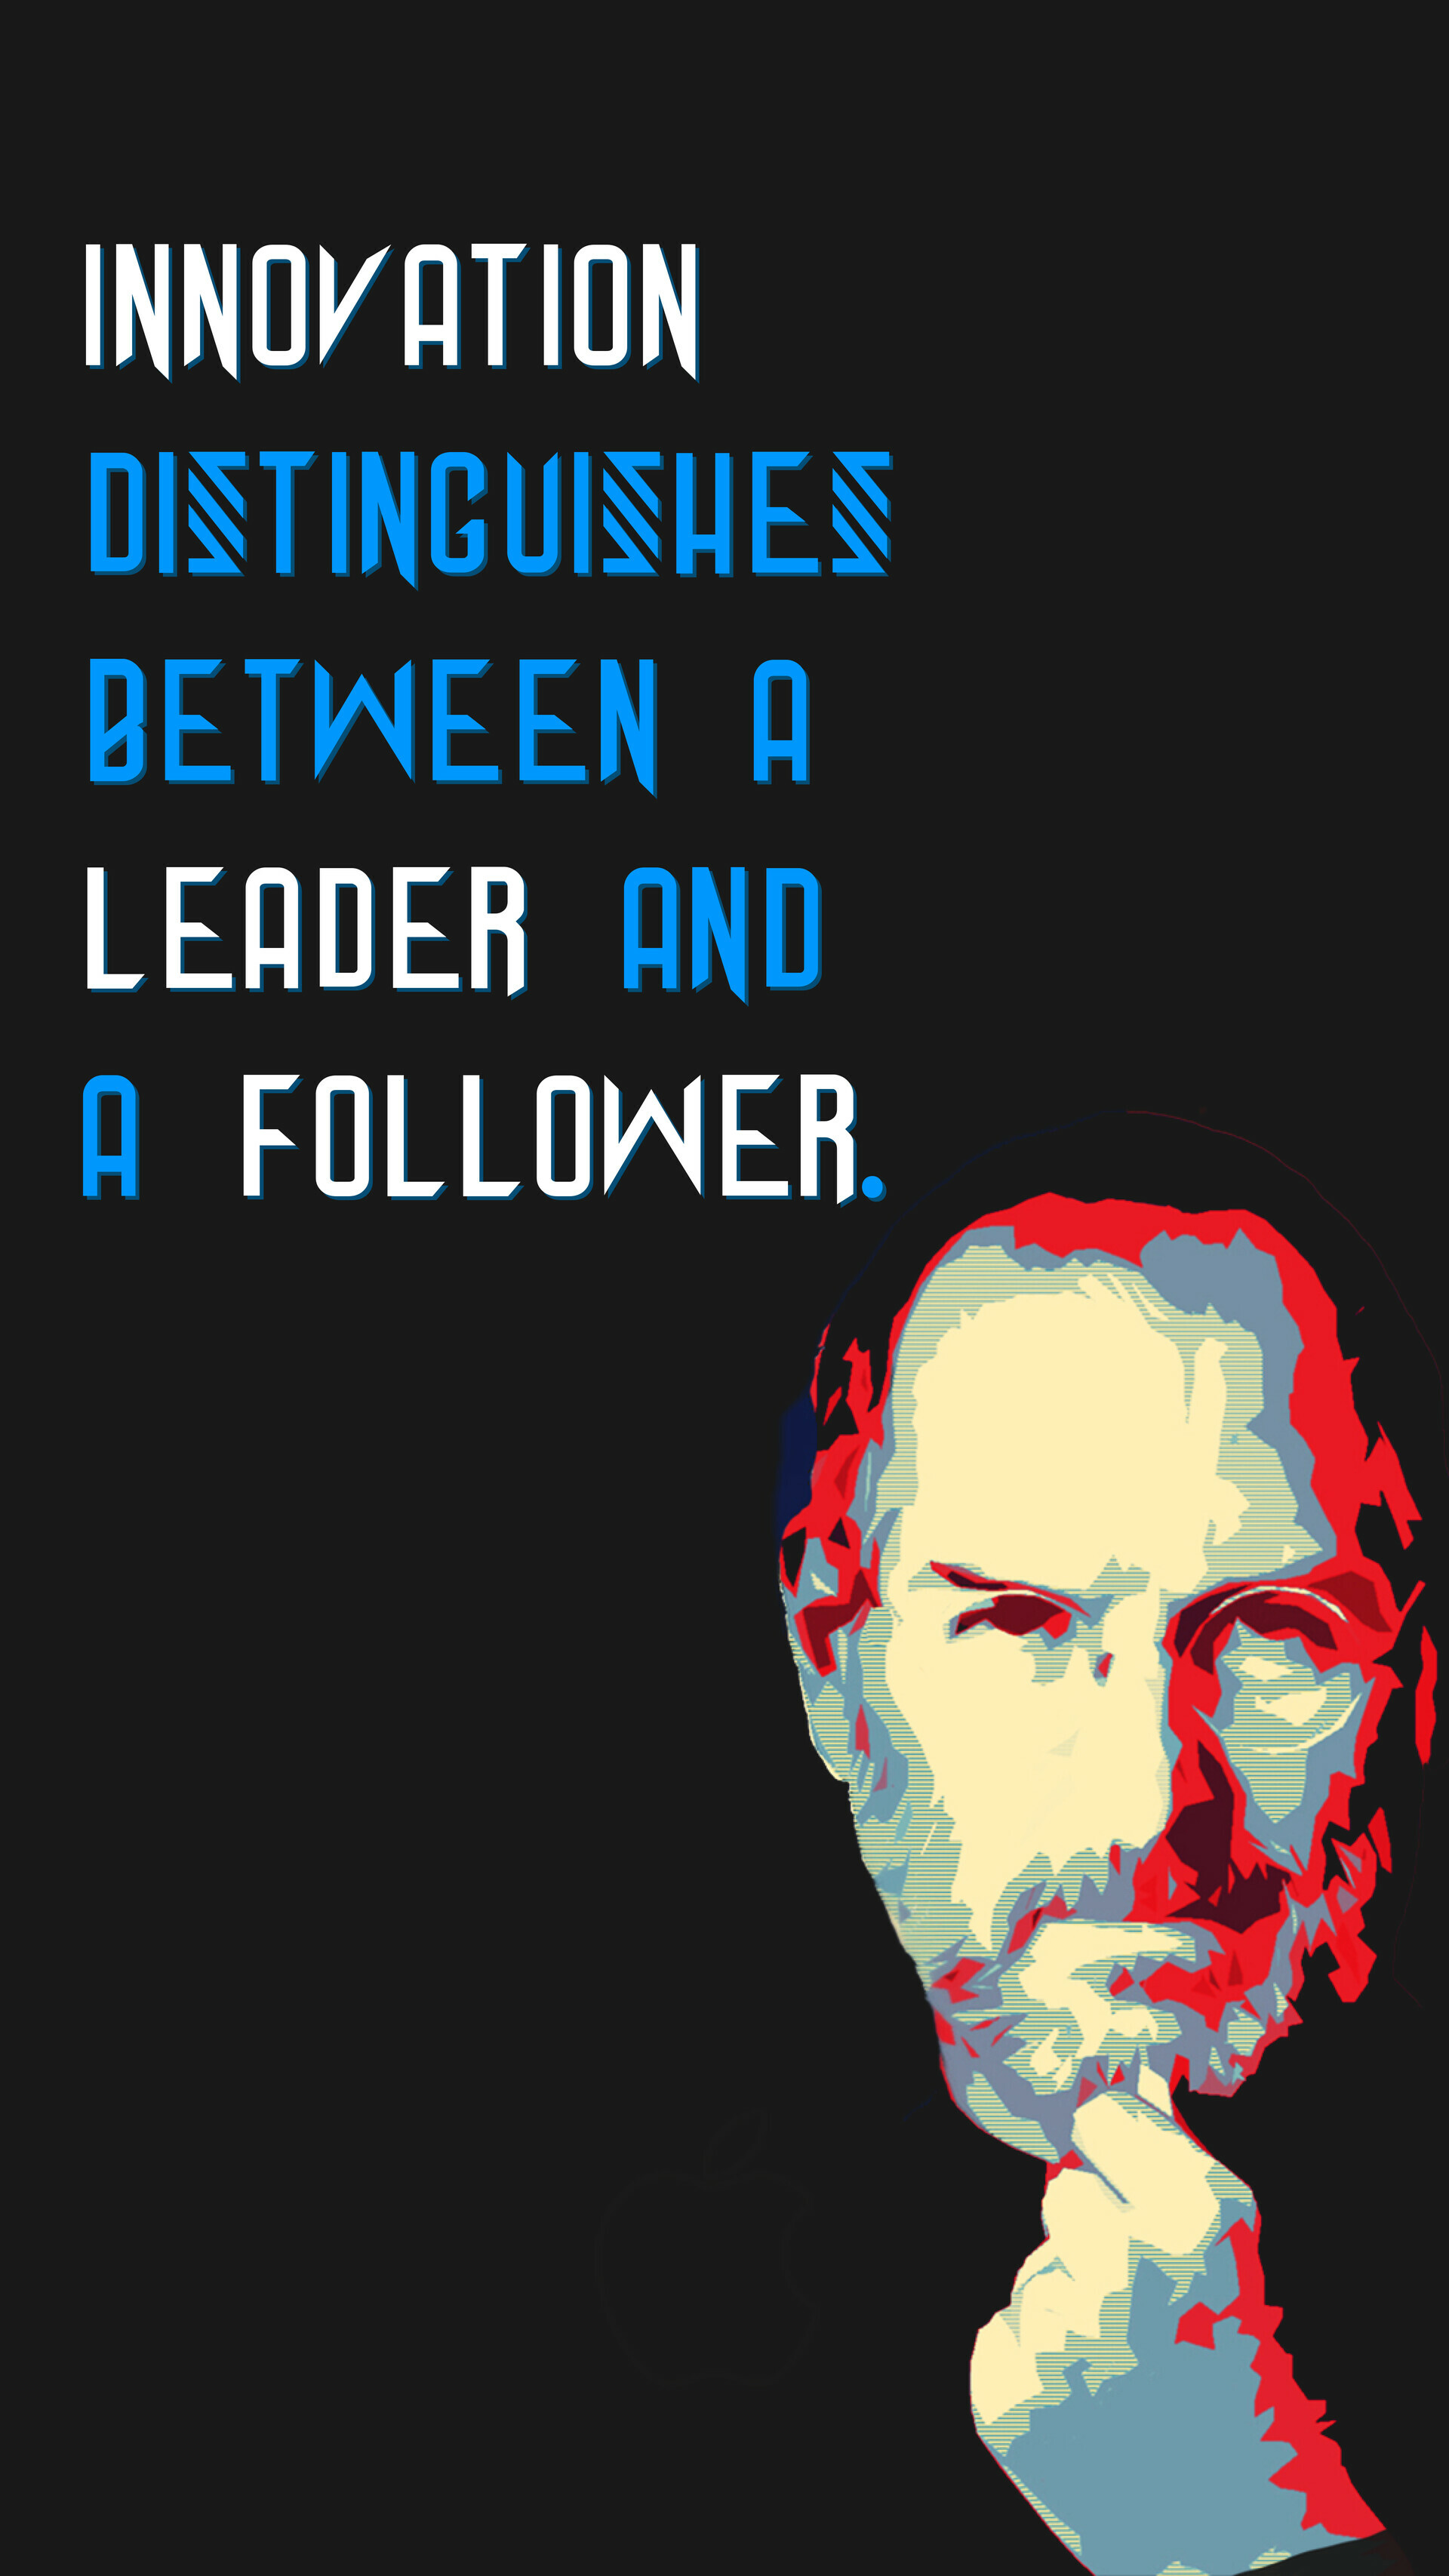 Steve Jobs: The co-founder, chairman, and CEO of Apple, The chairman and majority shareholder of Pixar. 1920x3420 HD Background.